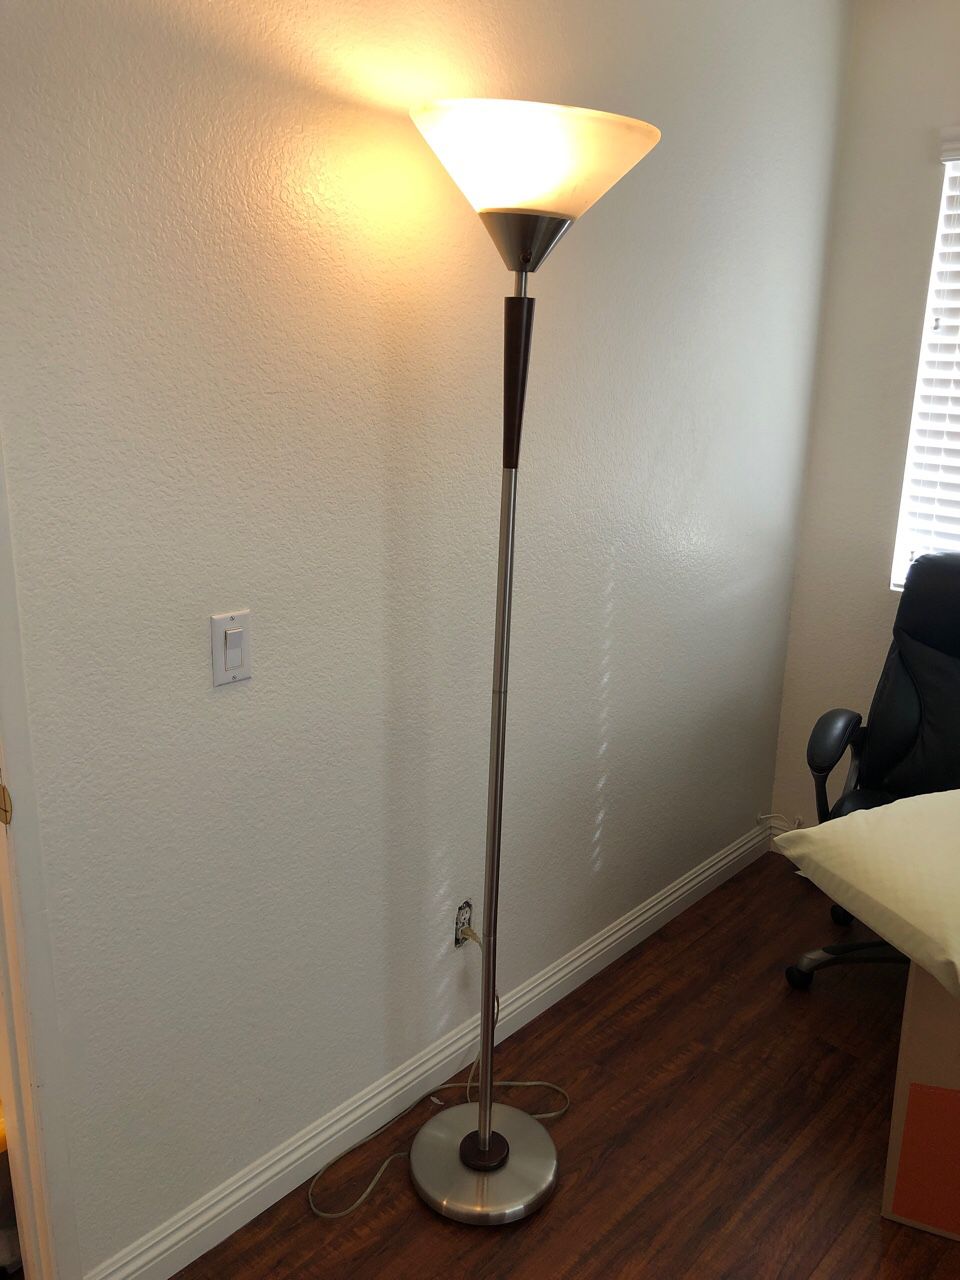 Stand alone floor lamp